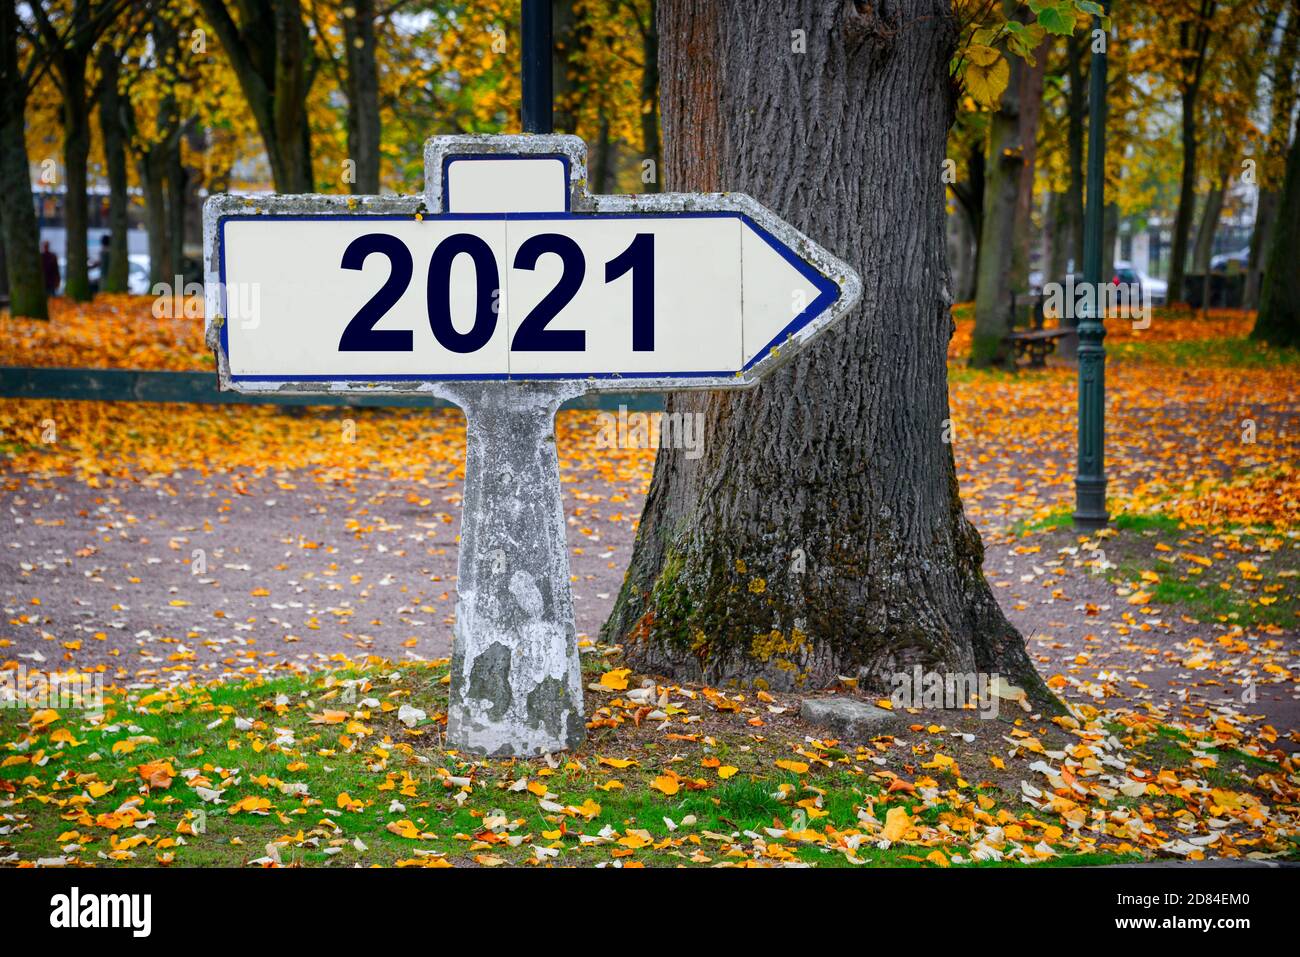 2021 written on an old french roadsign, fall background Stock Photo